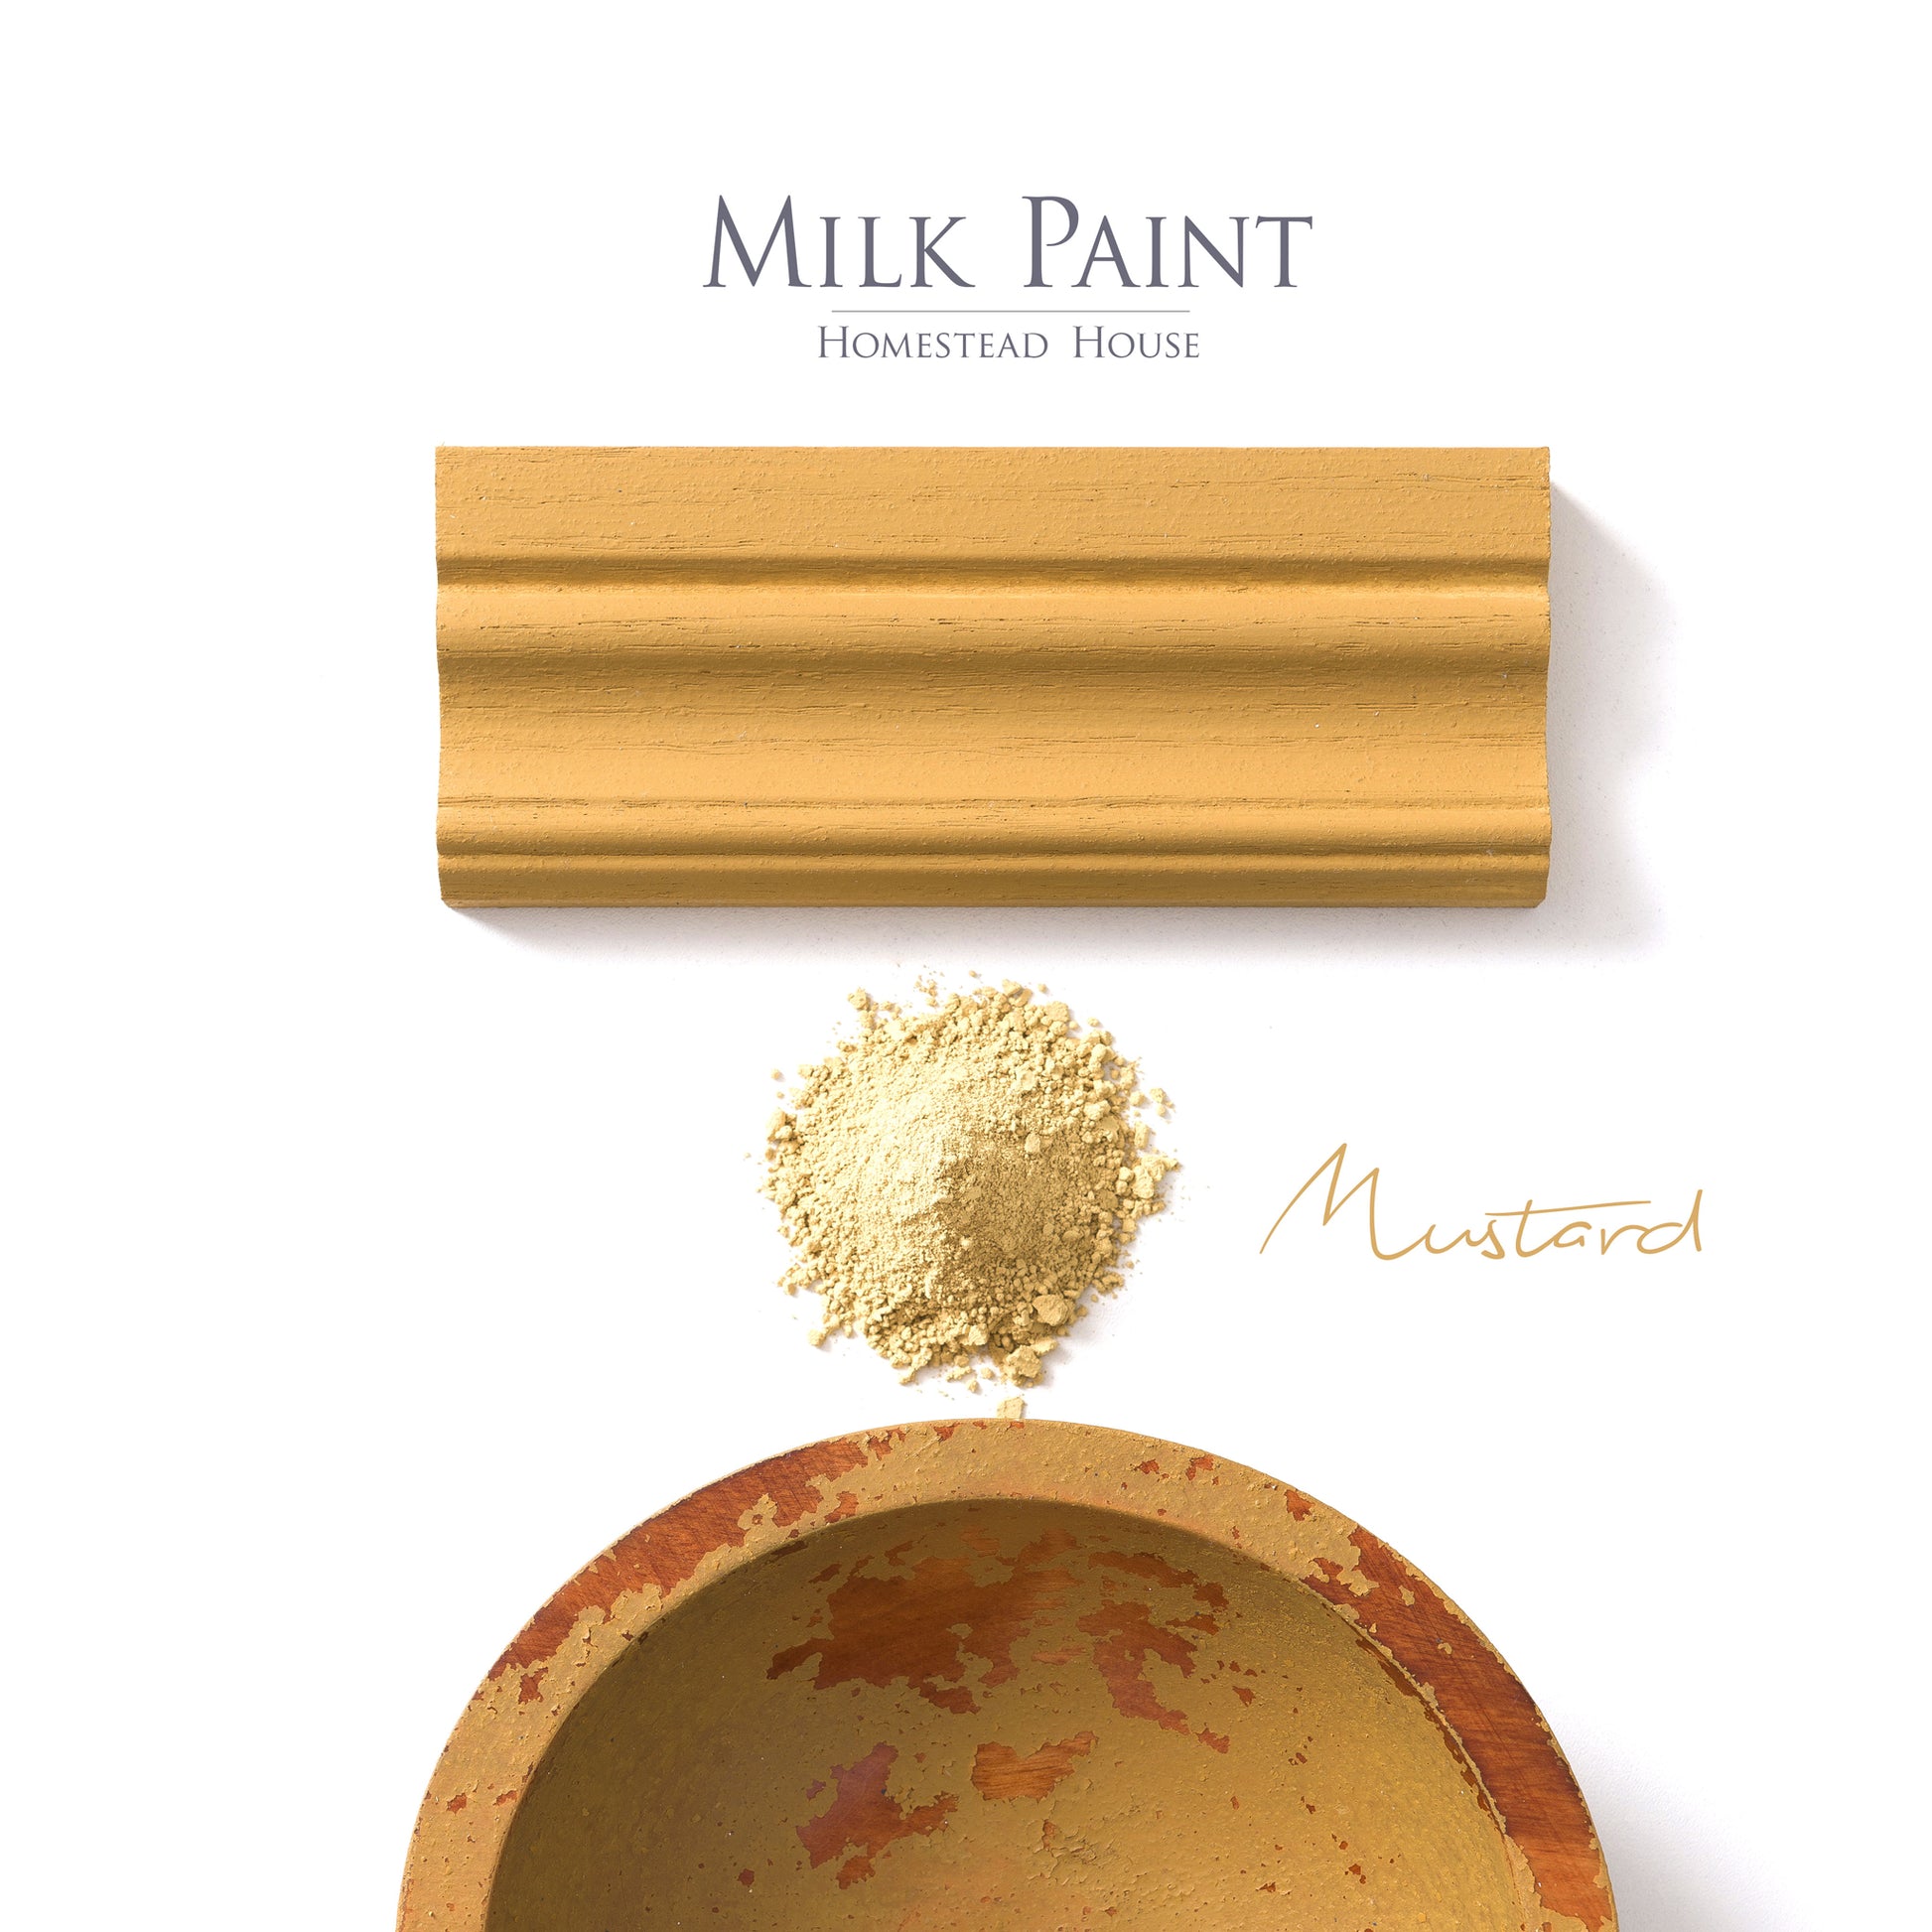 Milk Paint from Homestead House in Mustard, A traditional rich dark yellow with a muted orange hue. | homesteadhouse.ca